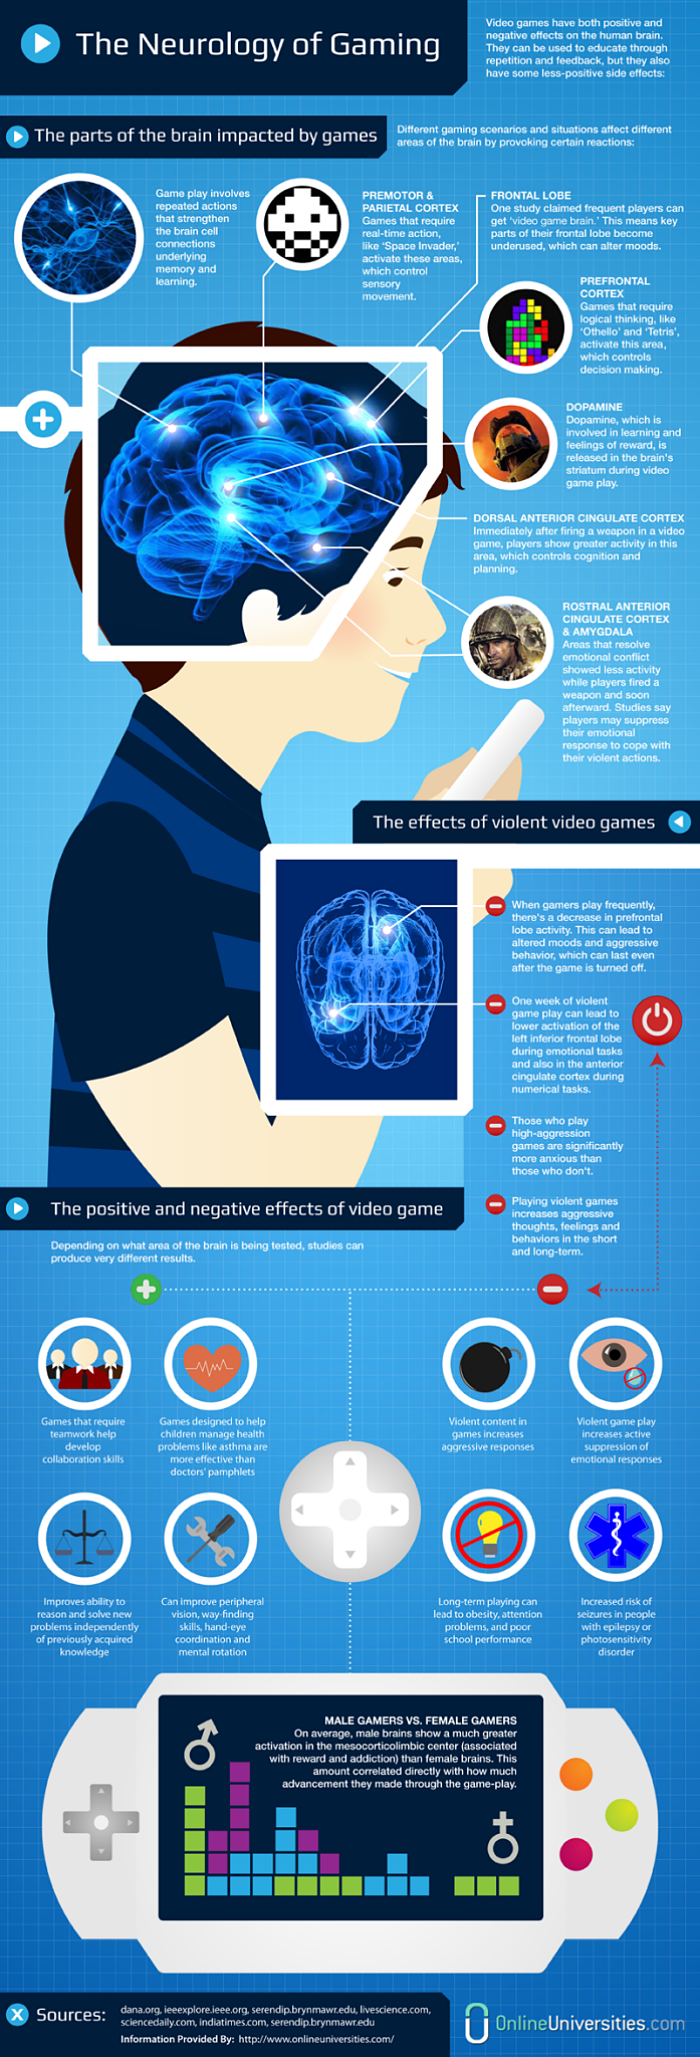 Effects of Video Games on the Brain (Infographic)